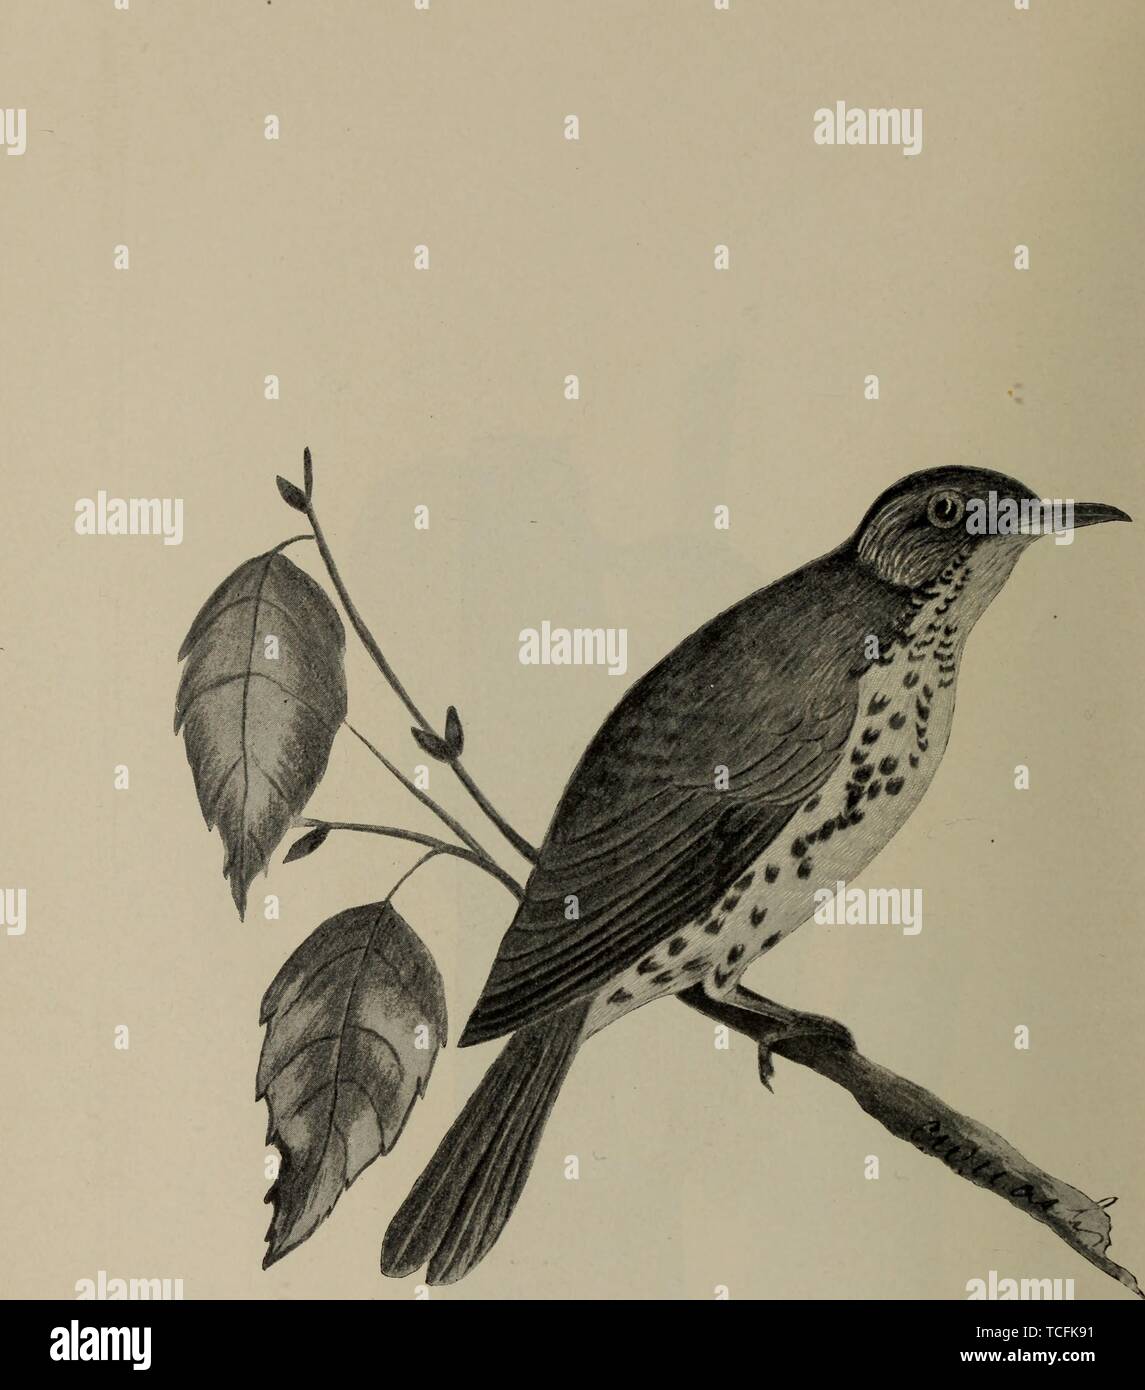 Engraved drawing of the Wood Thrush (Hylocichla mustelina), from the book 'The birds of Ontario in relation to agriculture' by Charles William Nash, 1898. Courtesy Internet Archive. () Stock Photo